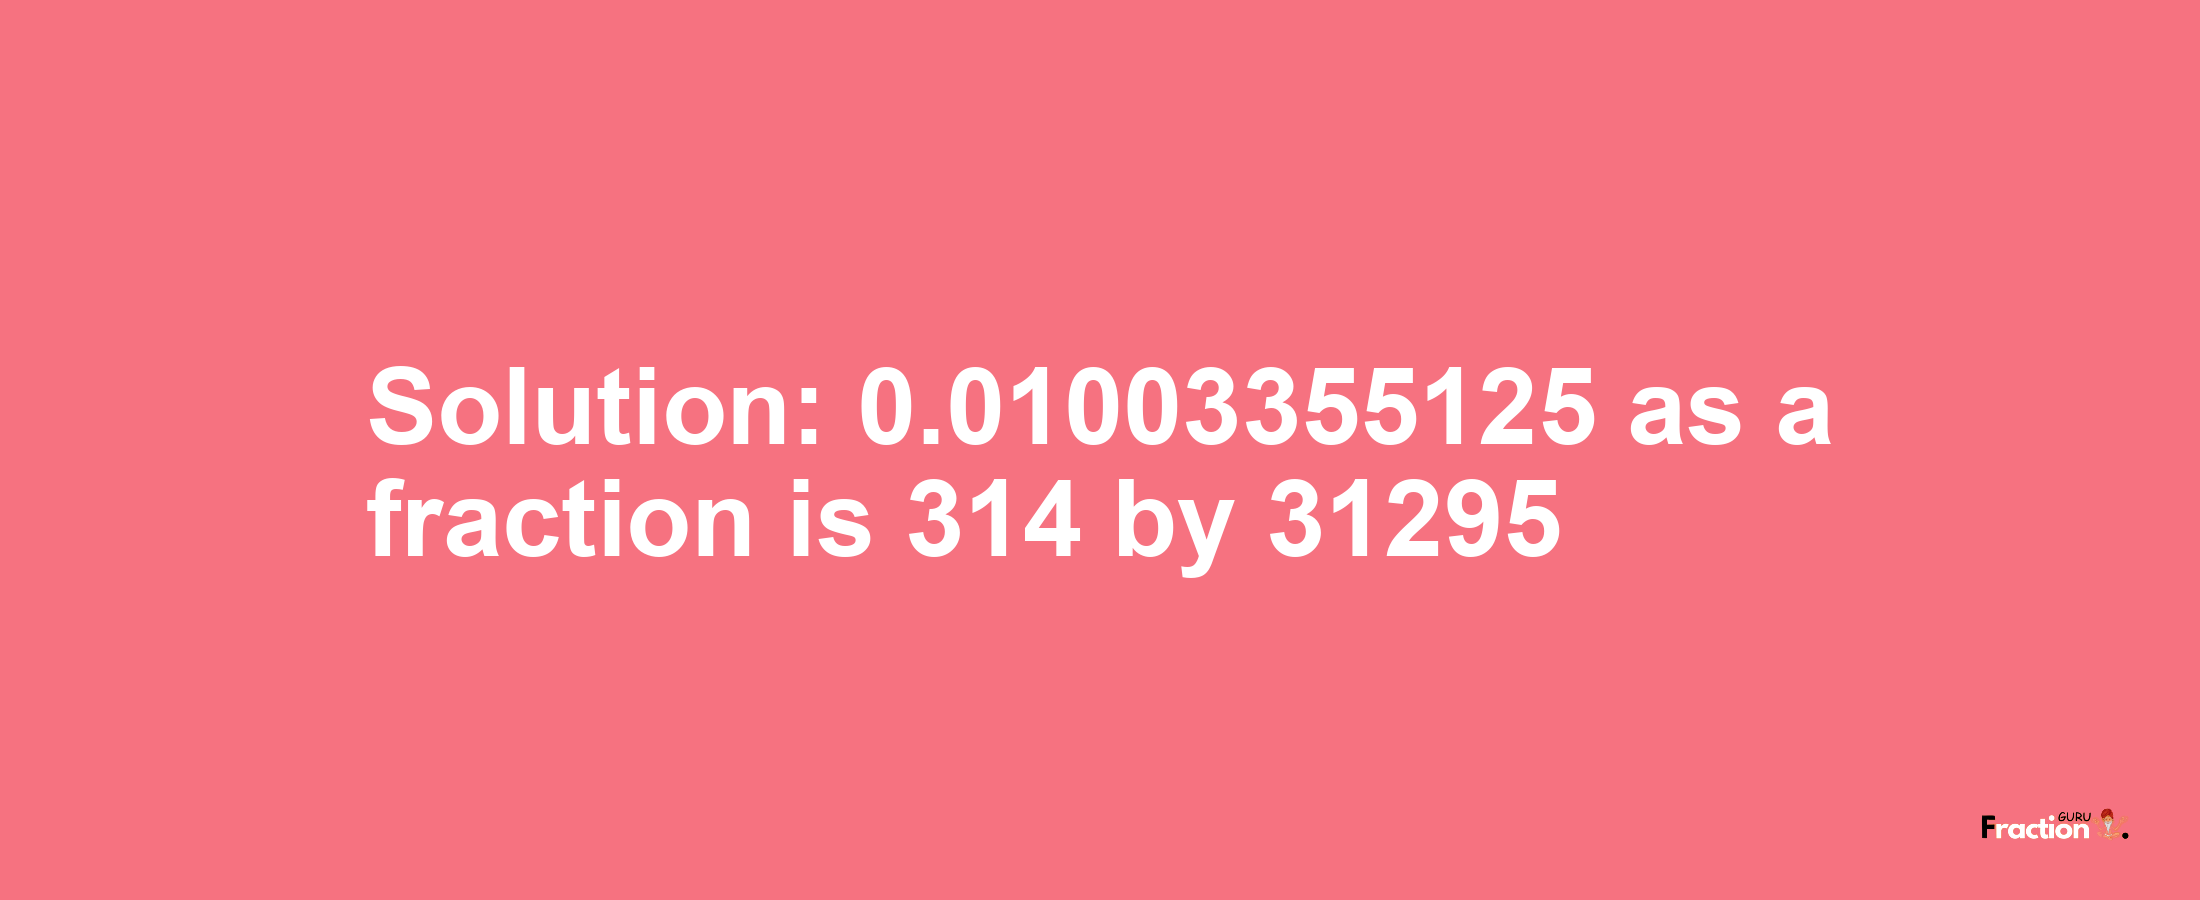 Solution:0.01003355125 as a fraction is 314/31295